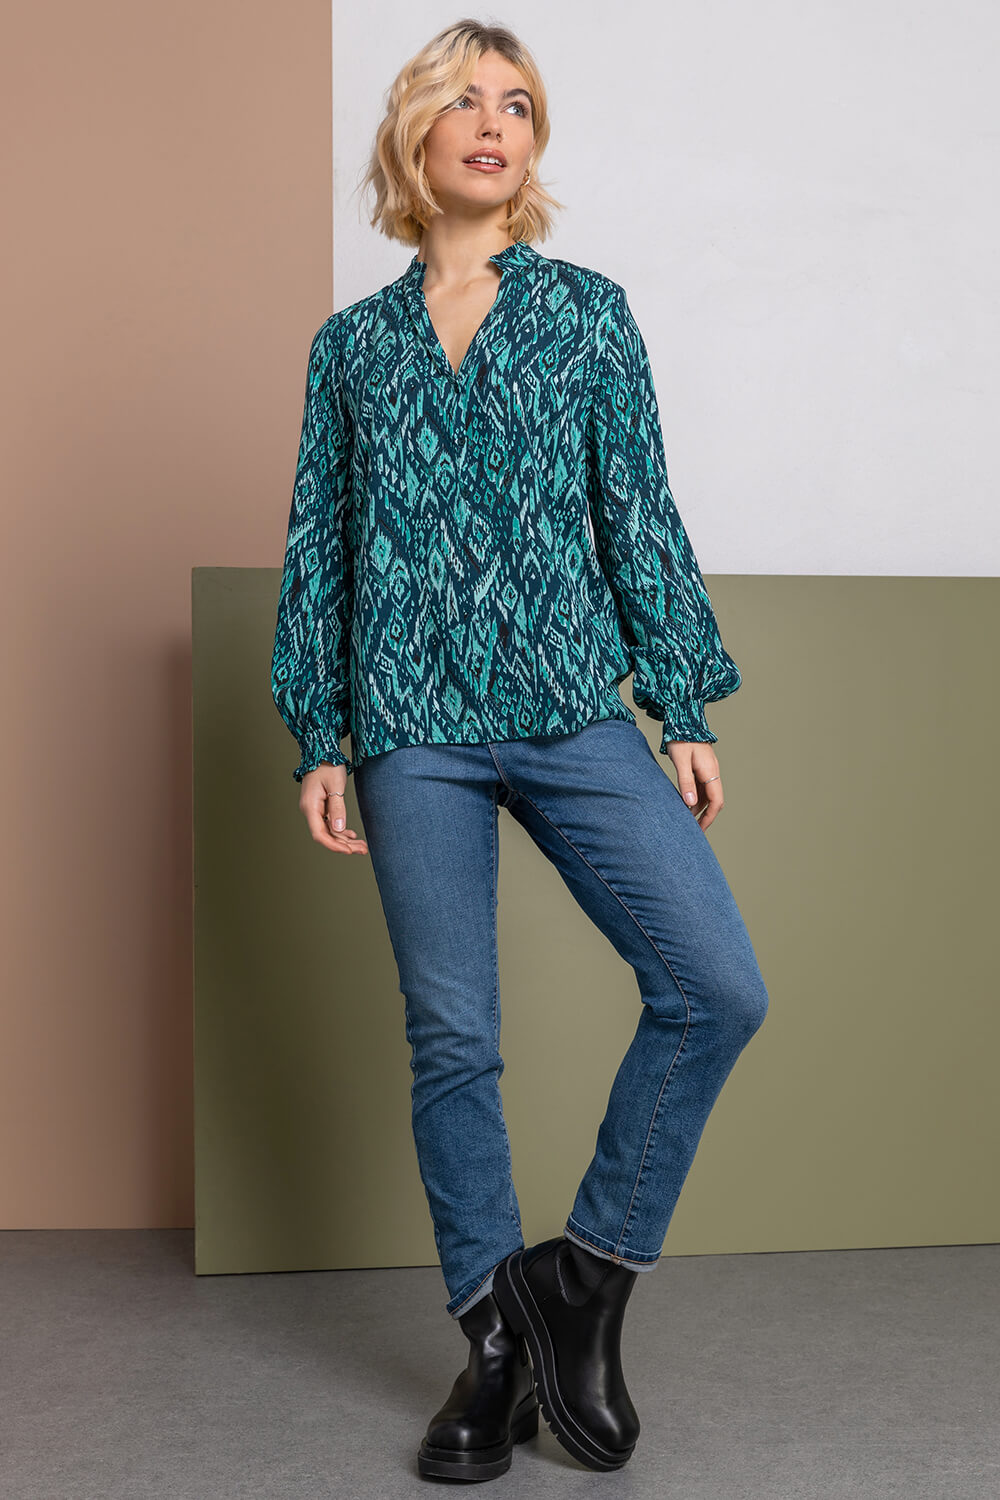 Turquoise Aztec Print Buttoned Blouse, Image 3 of 5